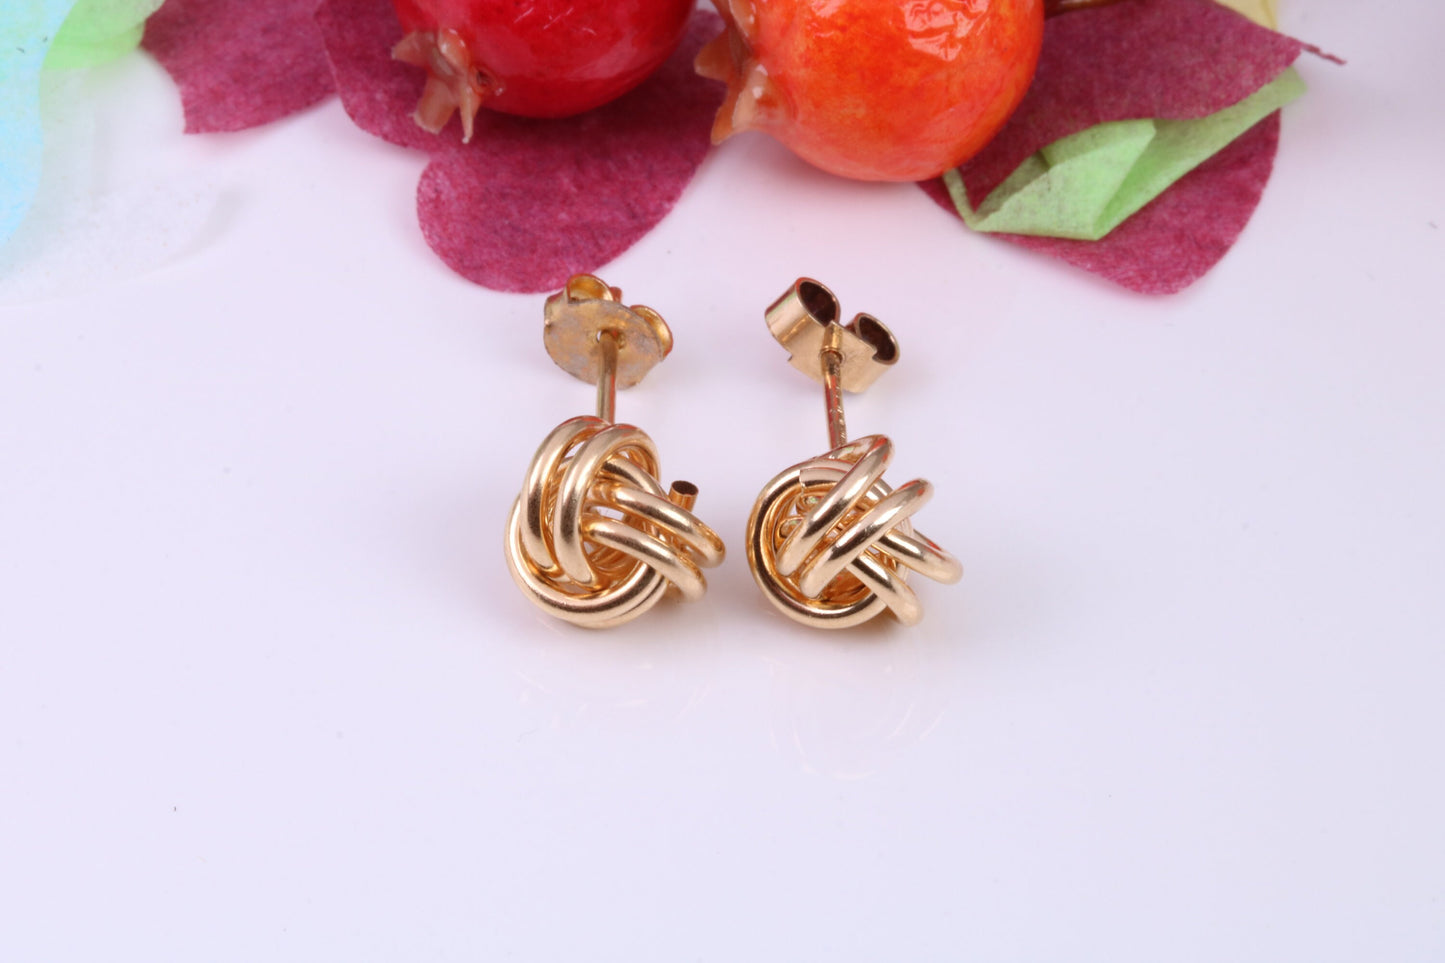 10 mm Round Knotted Stud Earrings Made from Solid 9ct Yellow Gold, British Hallmarked